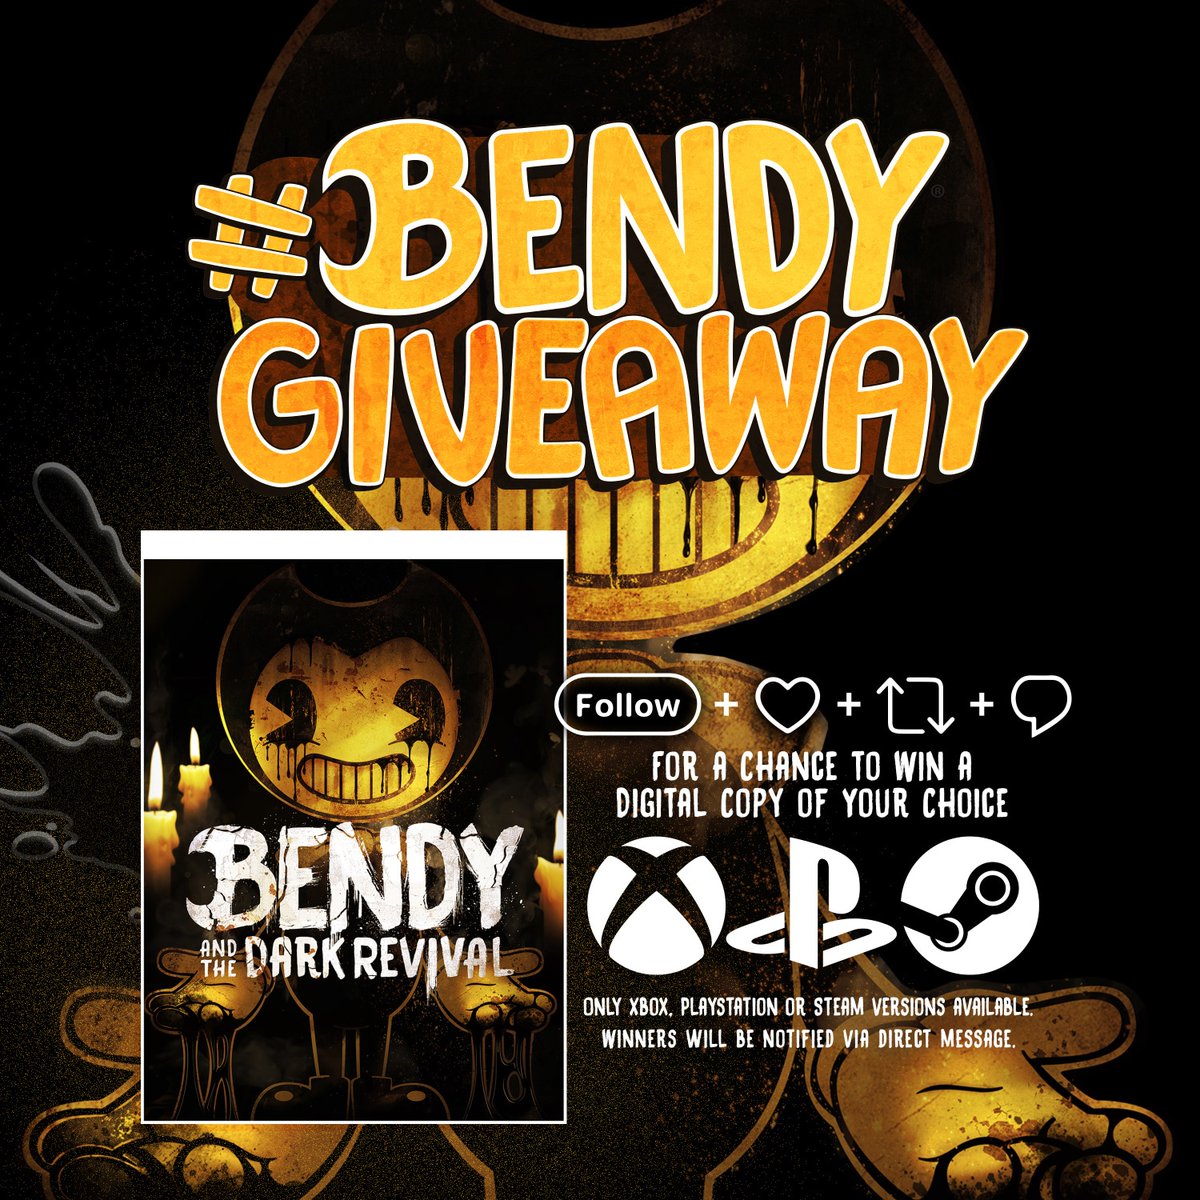 🟡 It’s time for the #BENDYGIVEAWAY ! 🟡 You could win #BATDR on the platform of your choice! 3 Winners will be chosen tomorrow at random. To enter do all 4 of the following on this post: 🚶🏻‍♂️ Follow ♥️ Like 🔁 Retweet ✍️ Comment Good luck! #BENDY